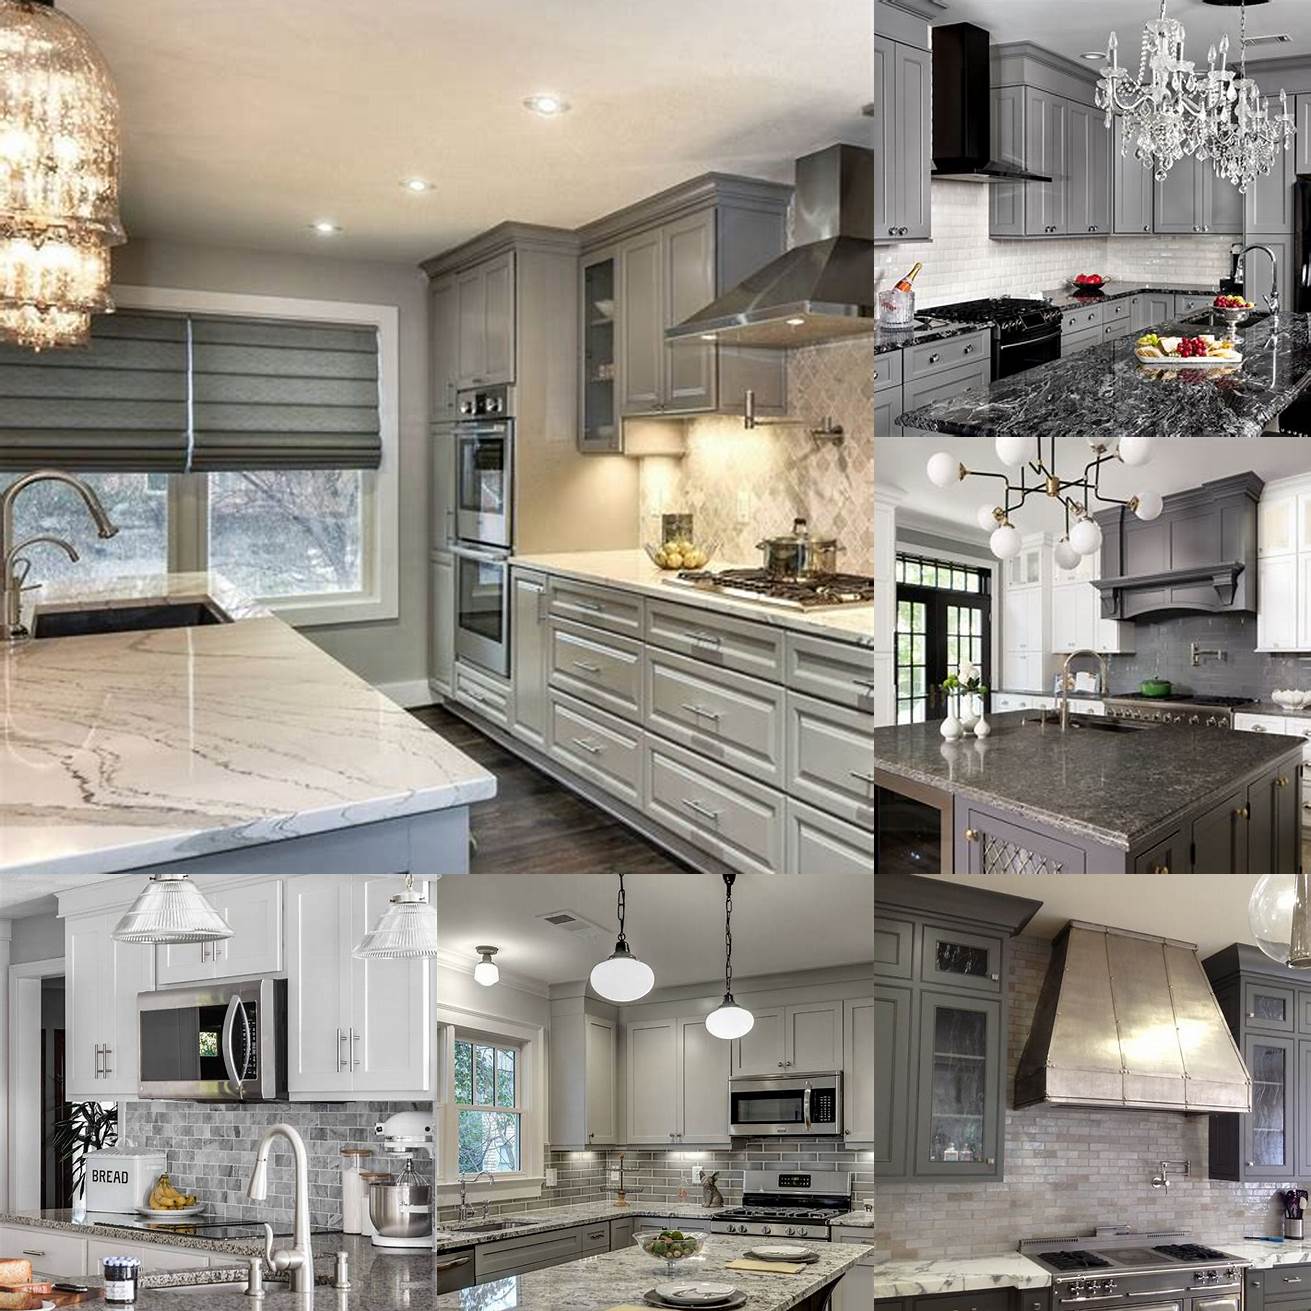 Gray kitchen cabinets with marble countertops and backsplash